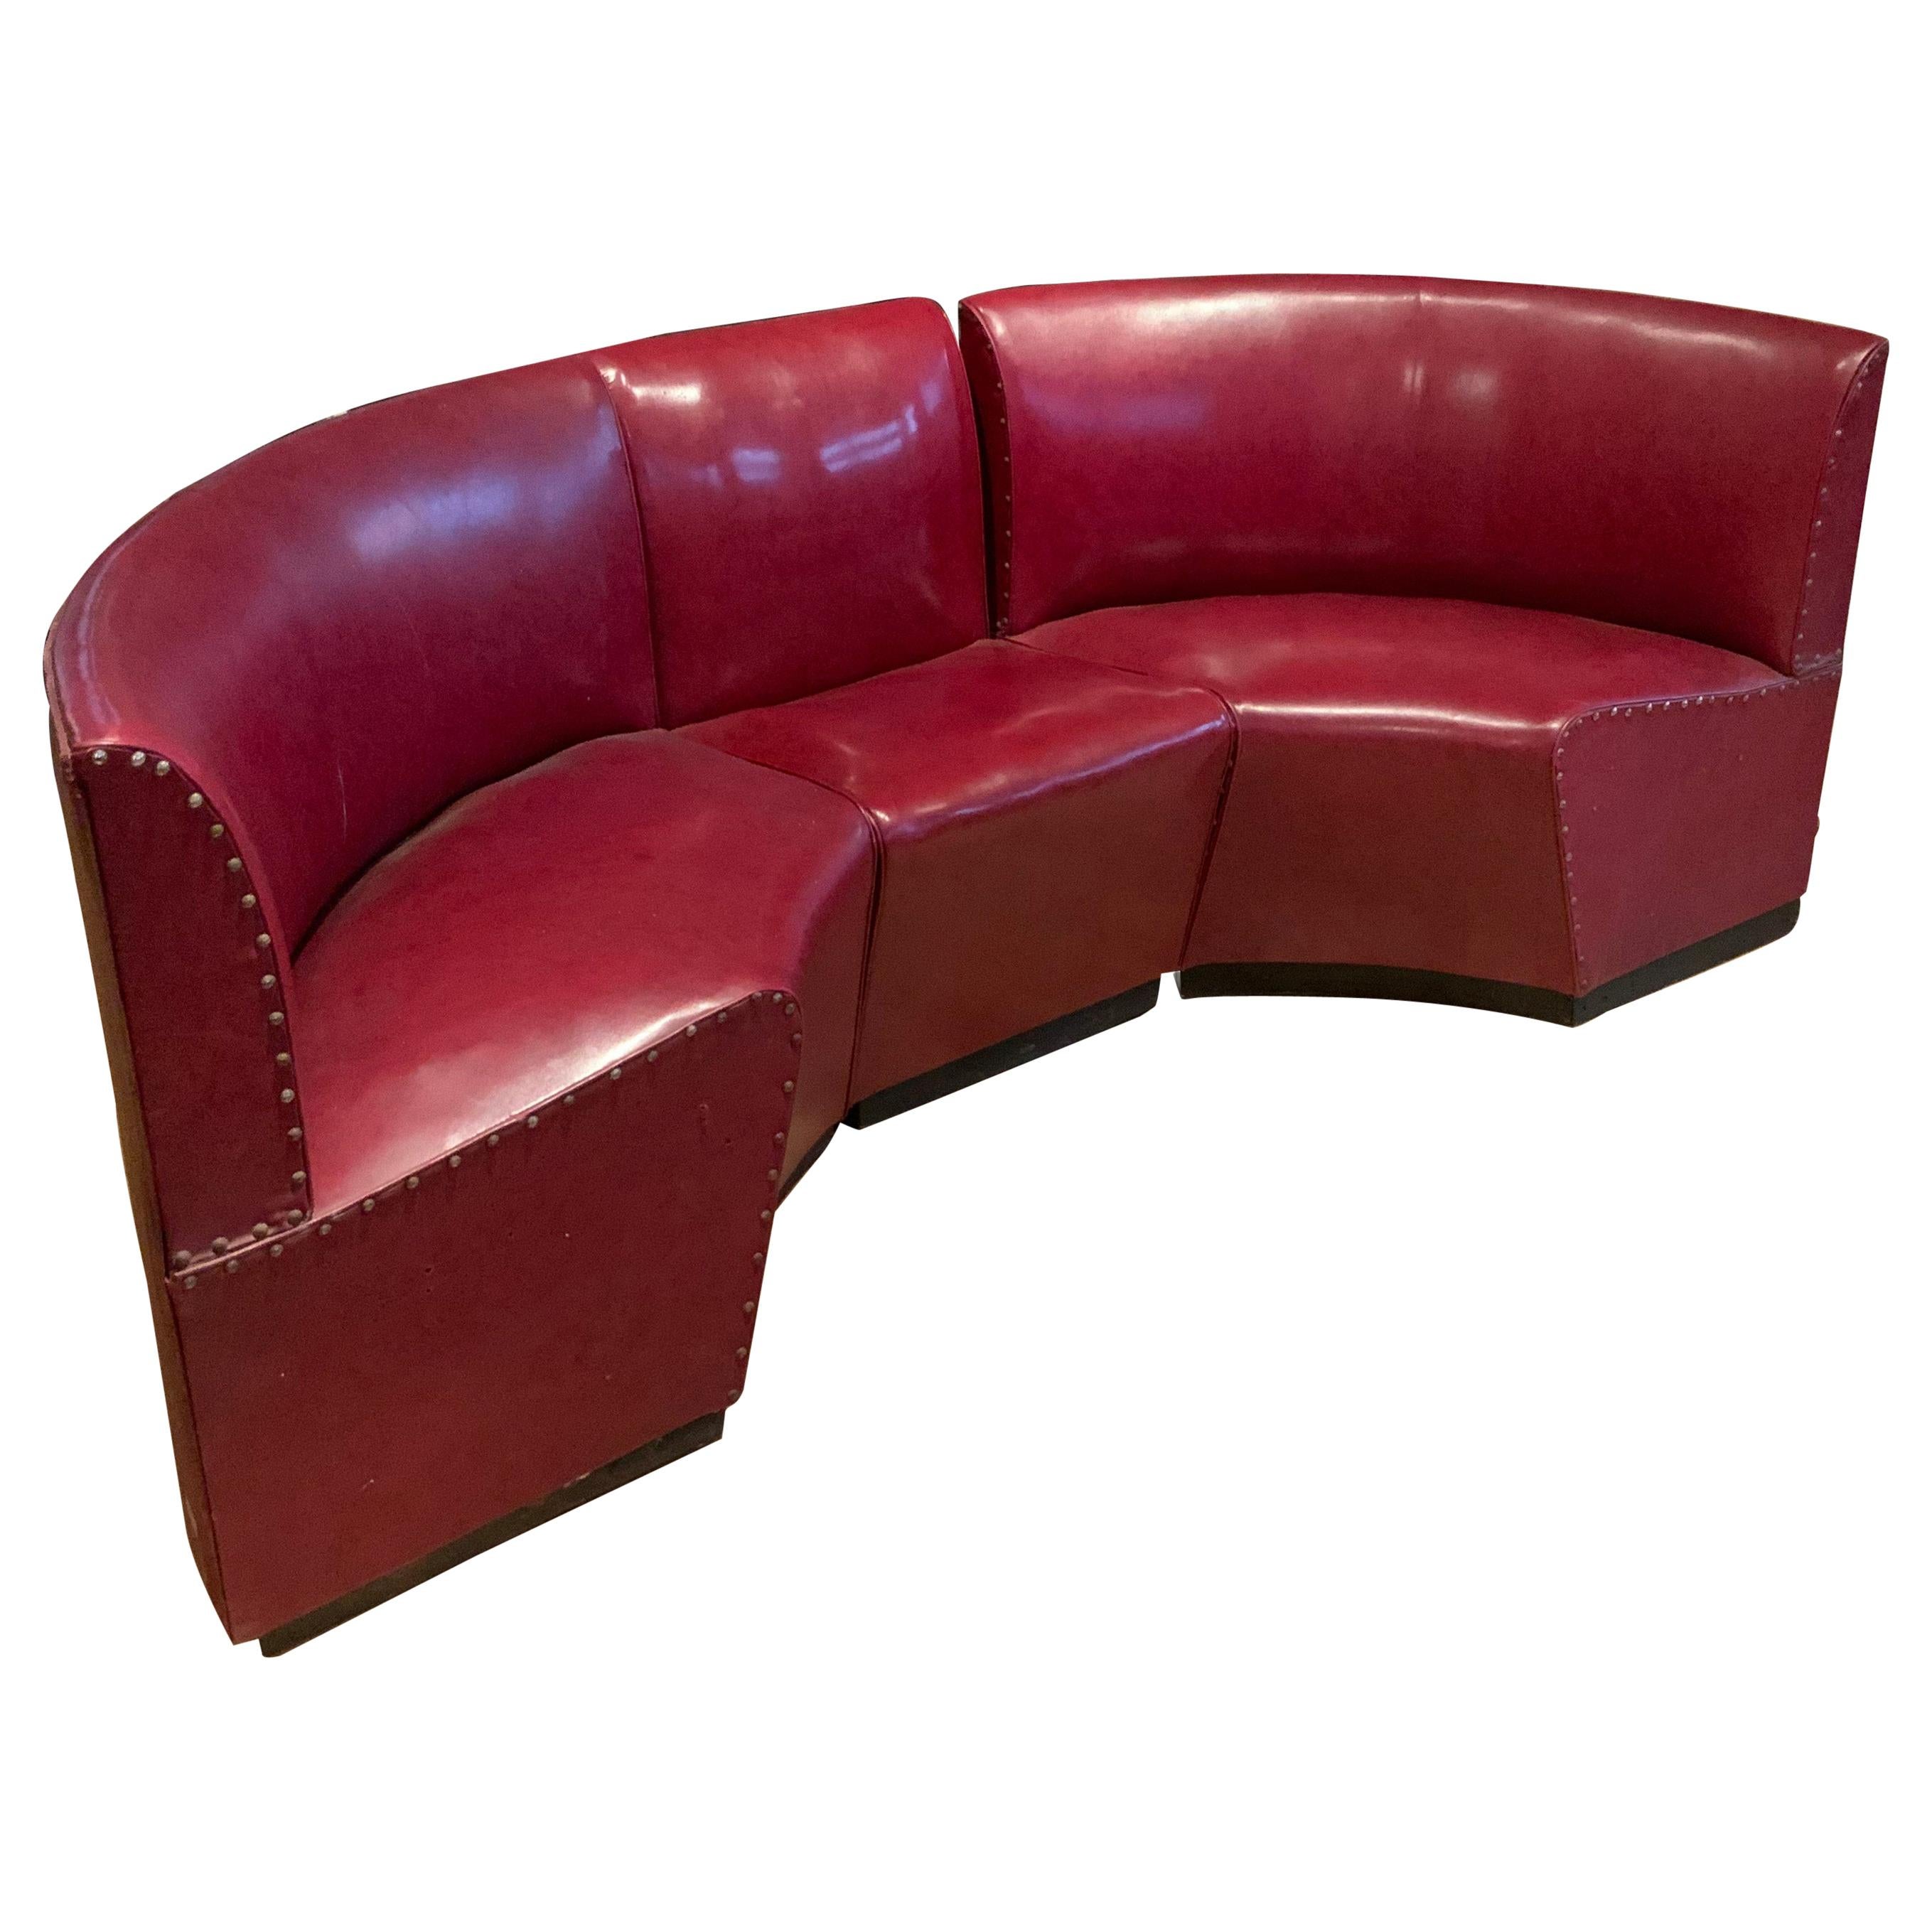 Curved Banquette - 2 For Sale on 1stDibs | curved banquette seating for sale,  curved banquette settee, curved banquette sofa